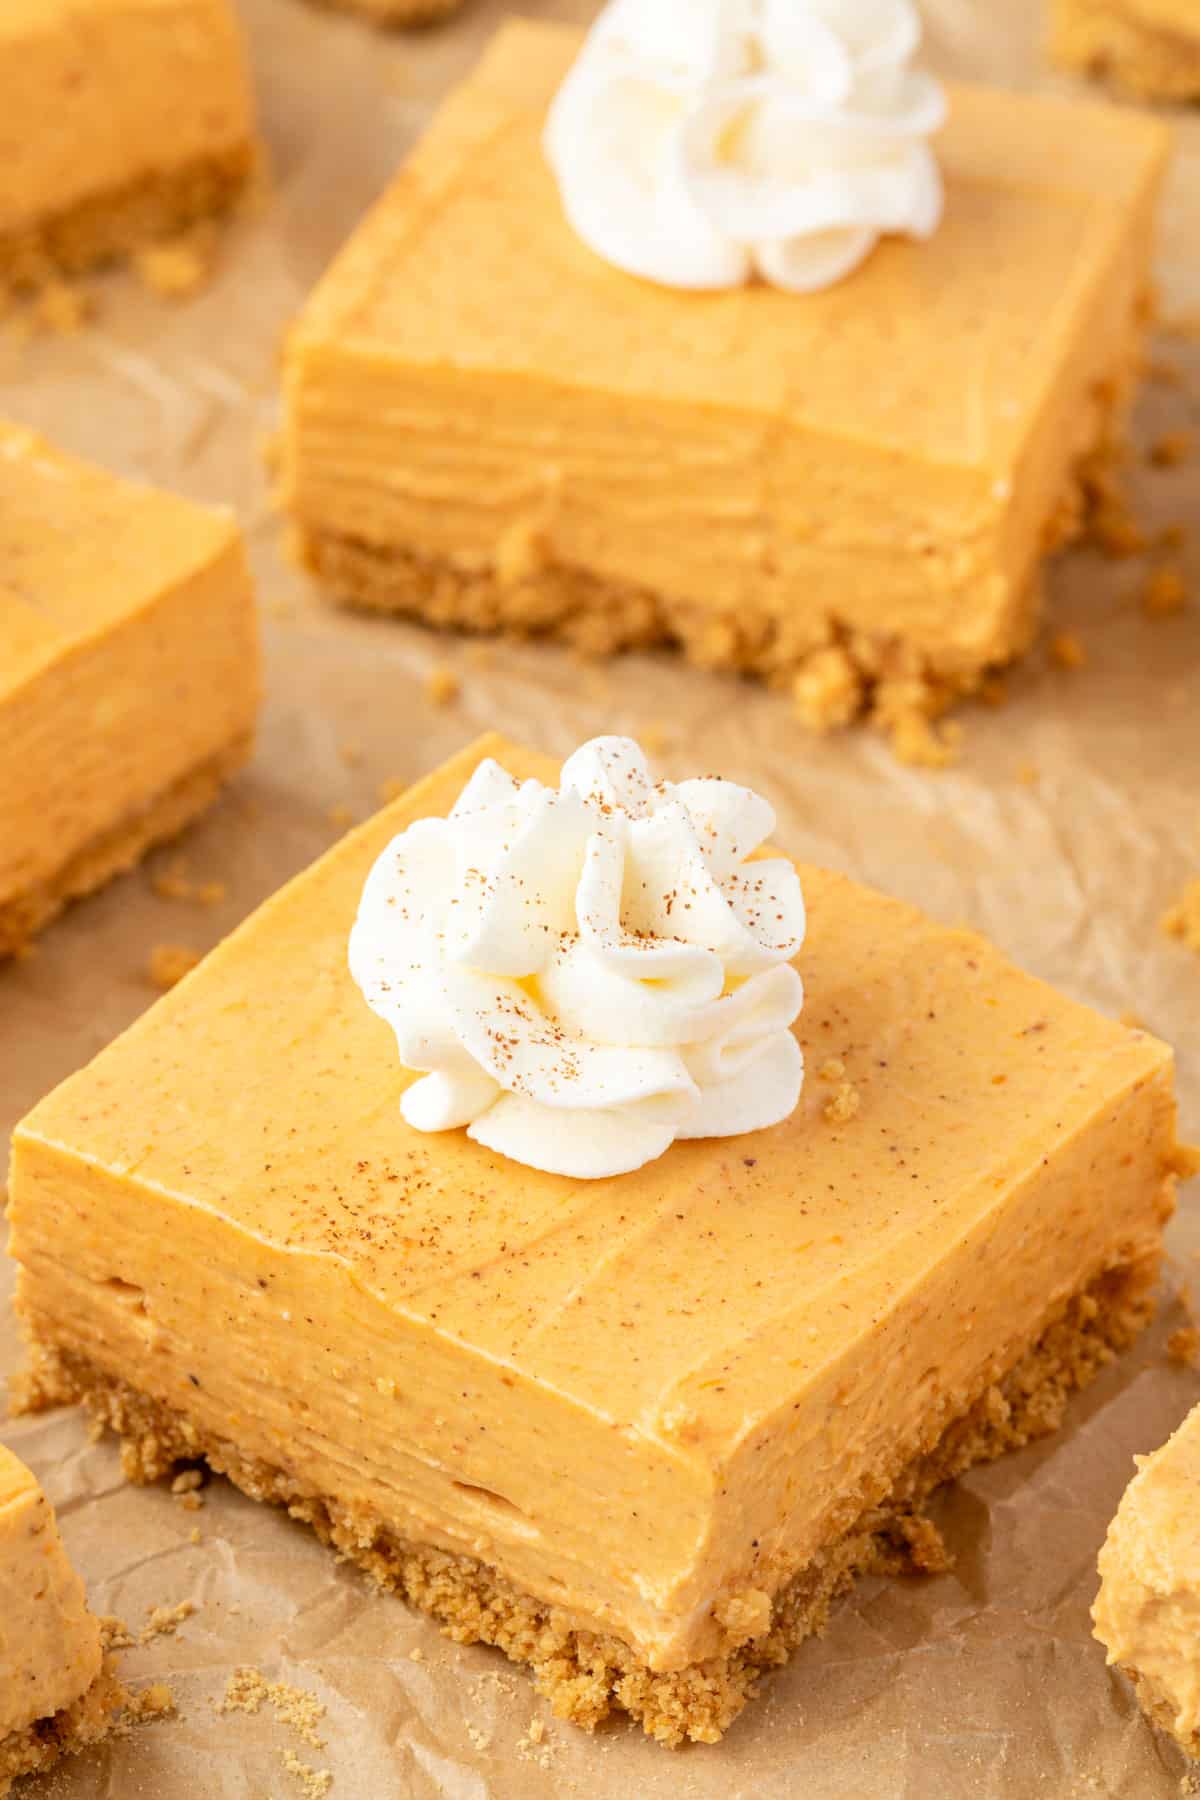 Square cheesecake bars on brown crumbled parchment, each square ha a dollop of whipped cream piped in the center.